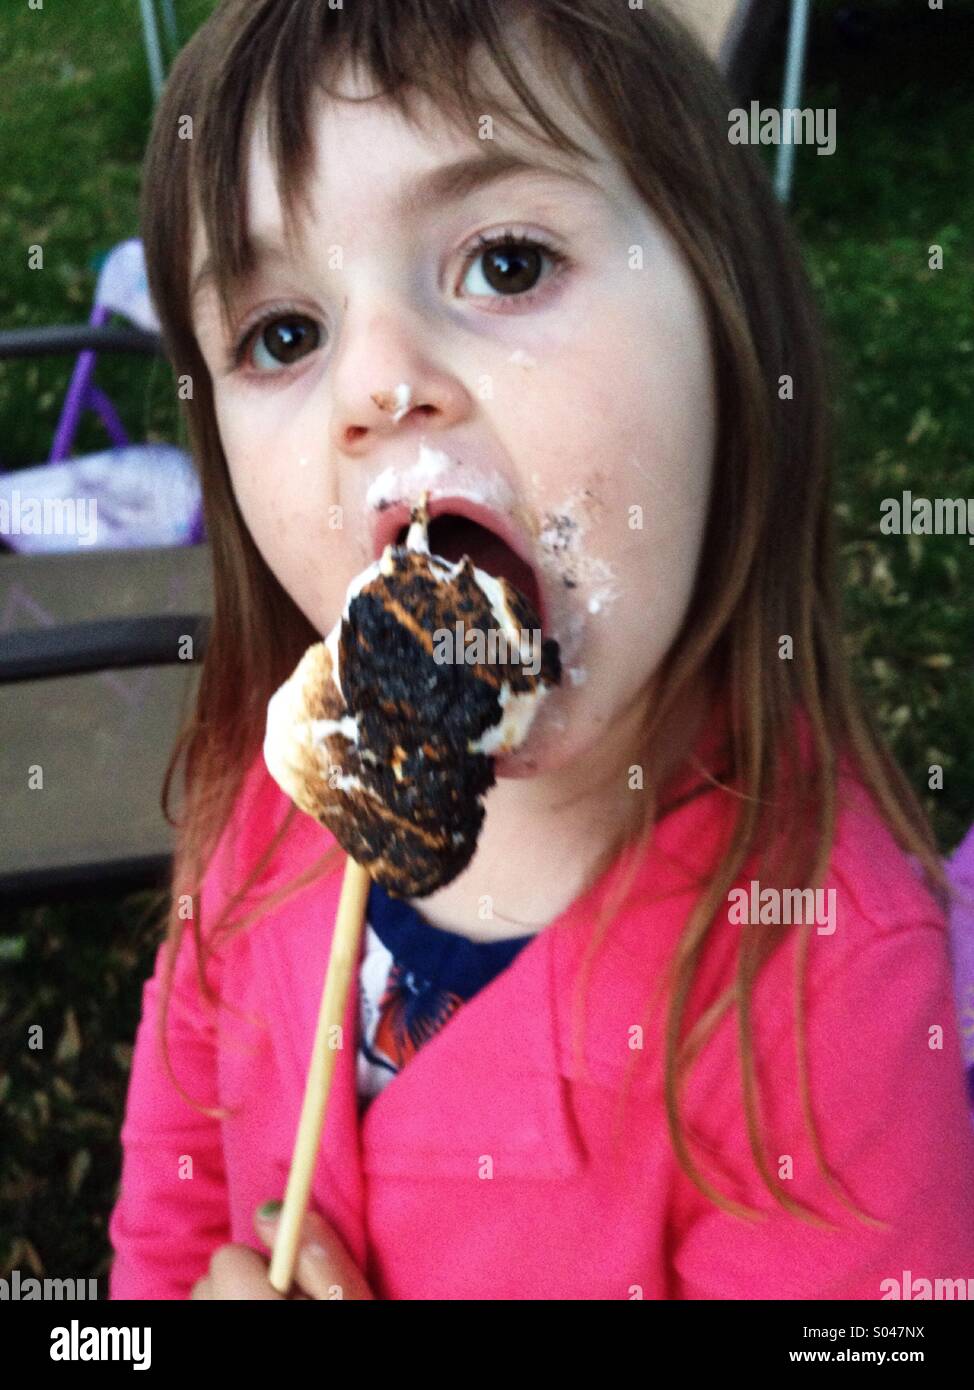 Little Caucasian toddler girl eating a marshmallow at a picnic in a pink sweater. Stock Photo